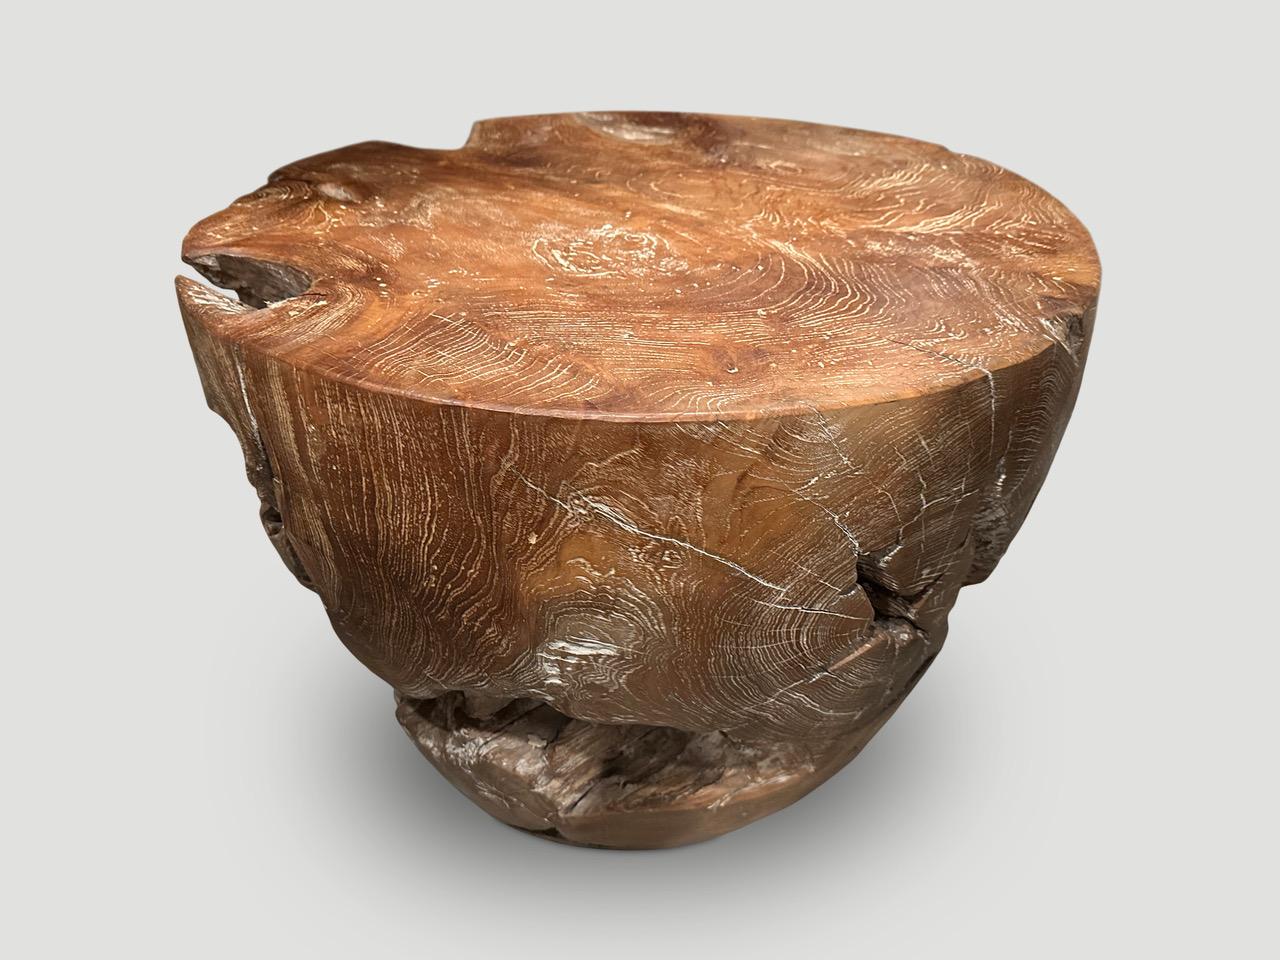 Impressive natural teak side table hand carved from a single reclaimed teak root into this sculptural drum shape. We added a light ceruse revealing the beautiful wood grain. Custom sizes and stains available. A perfect combination of modern and